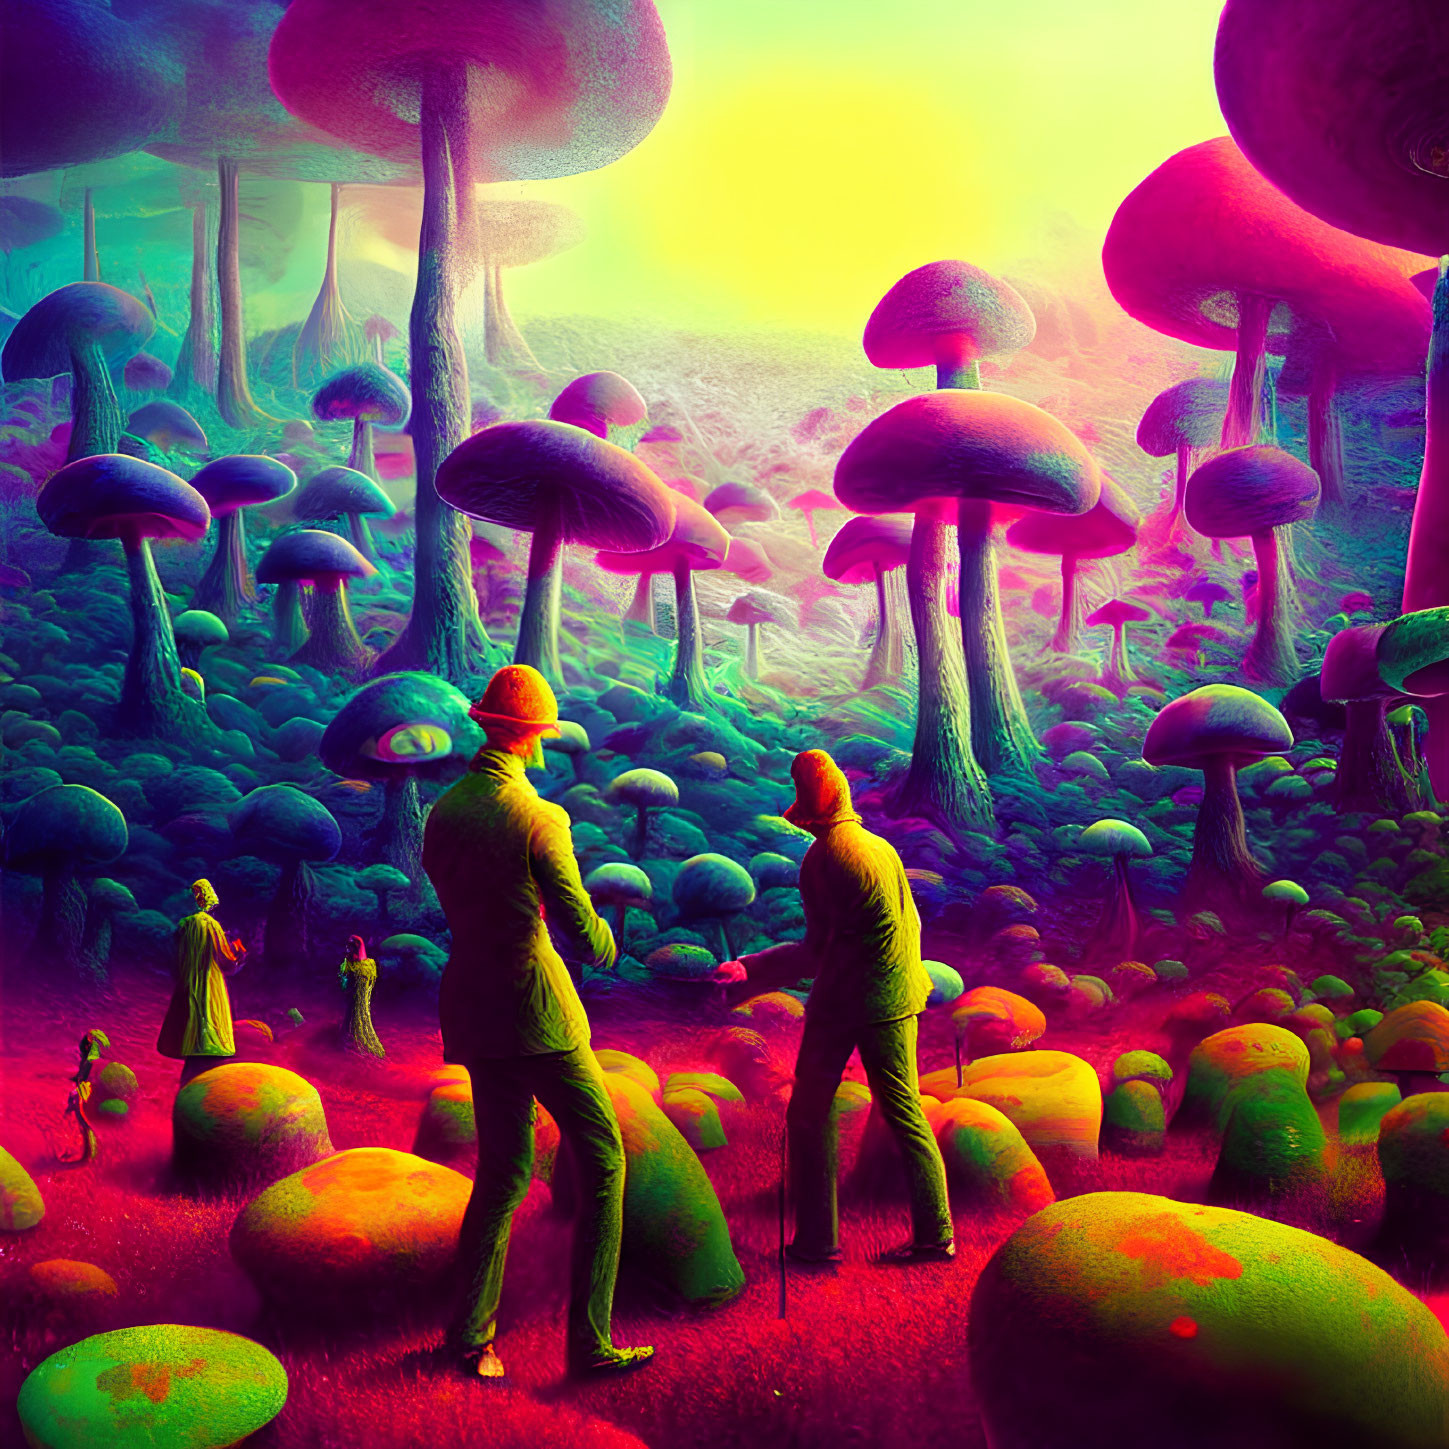 Colorful Fantasy Landscape with Towering Mushrooms and Figures in Yellow Jackets